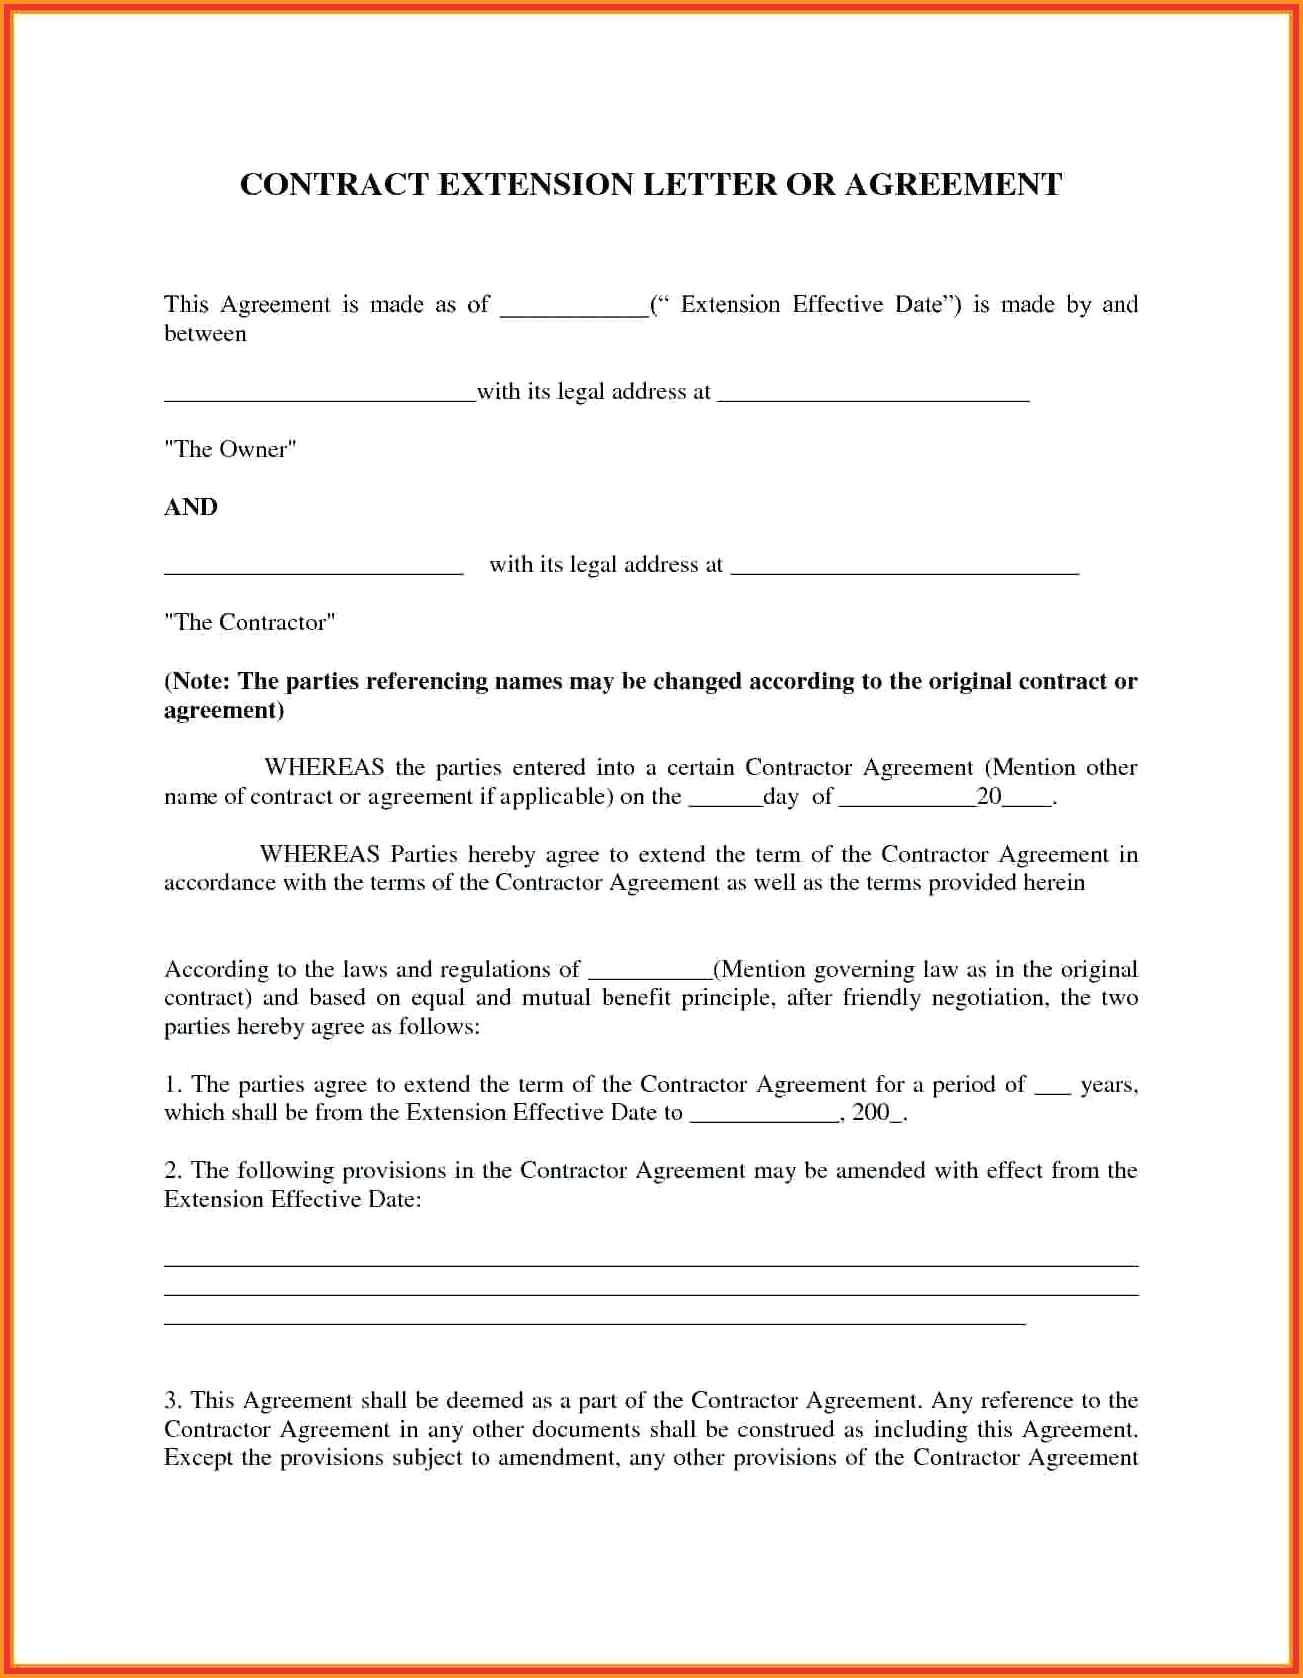 contract extension agreement letter example